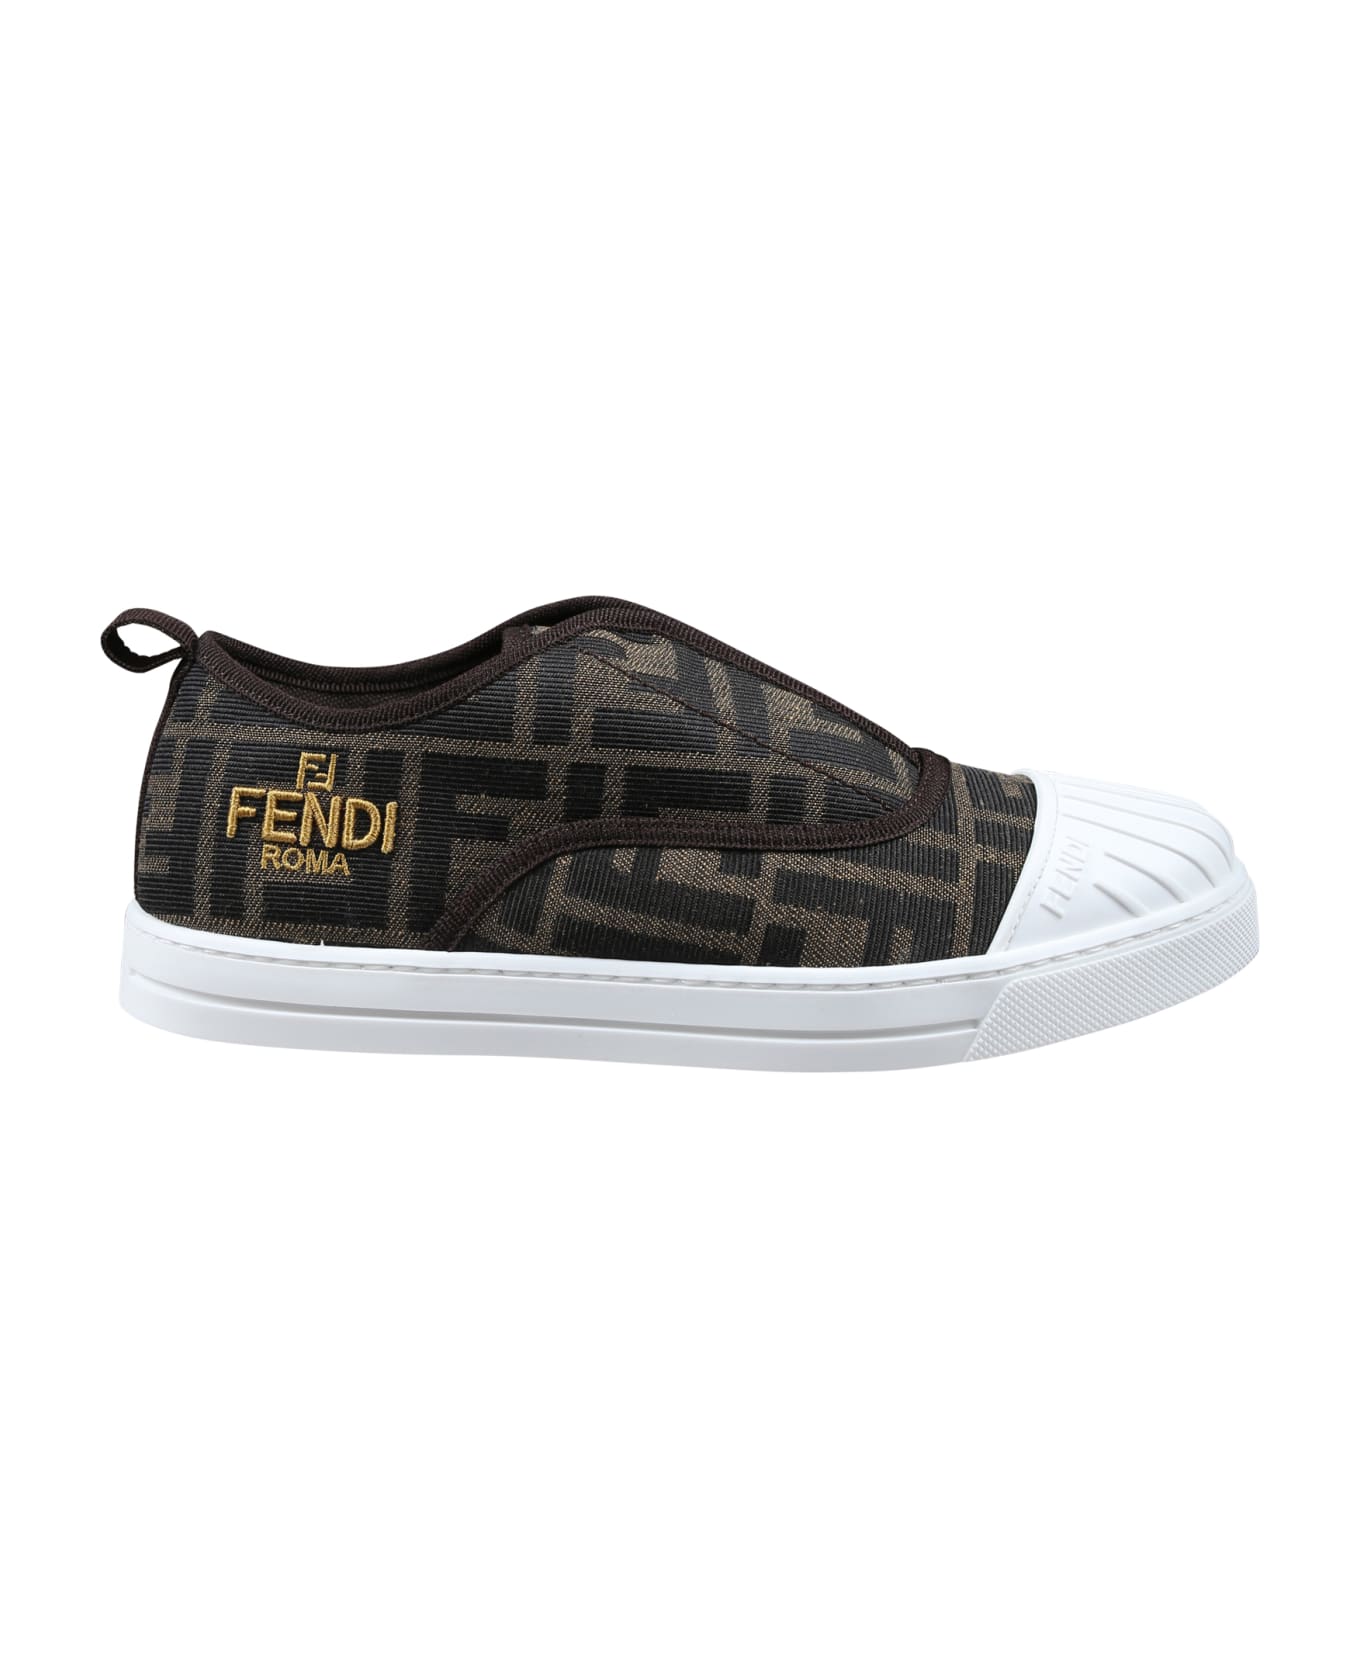 Fendi Sneakers For Kids With All-over Ff Confirms - Brown